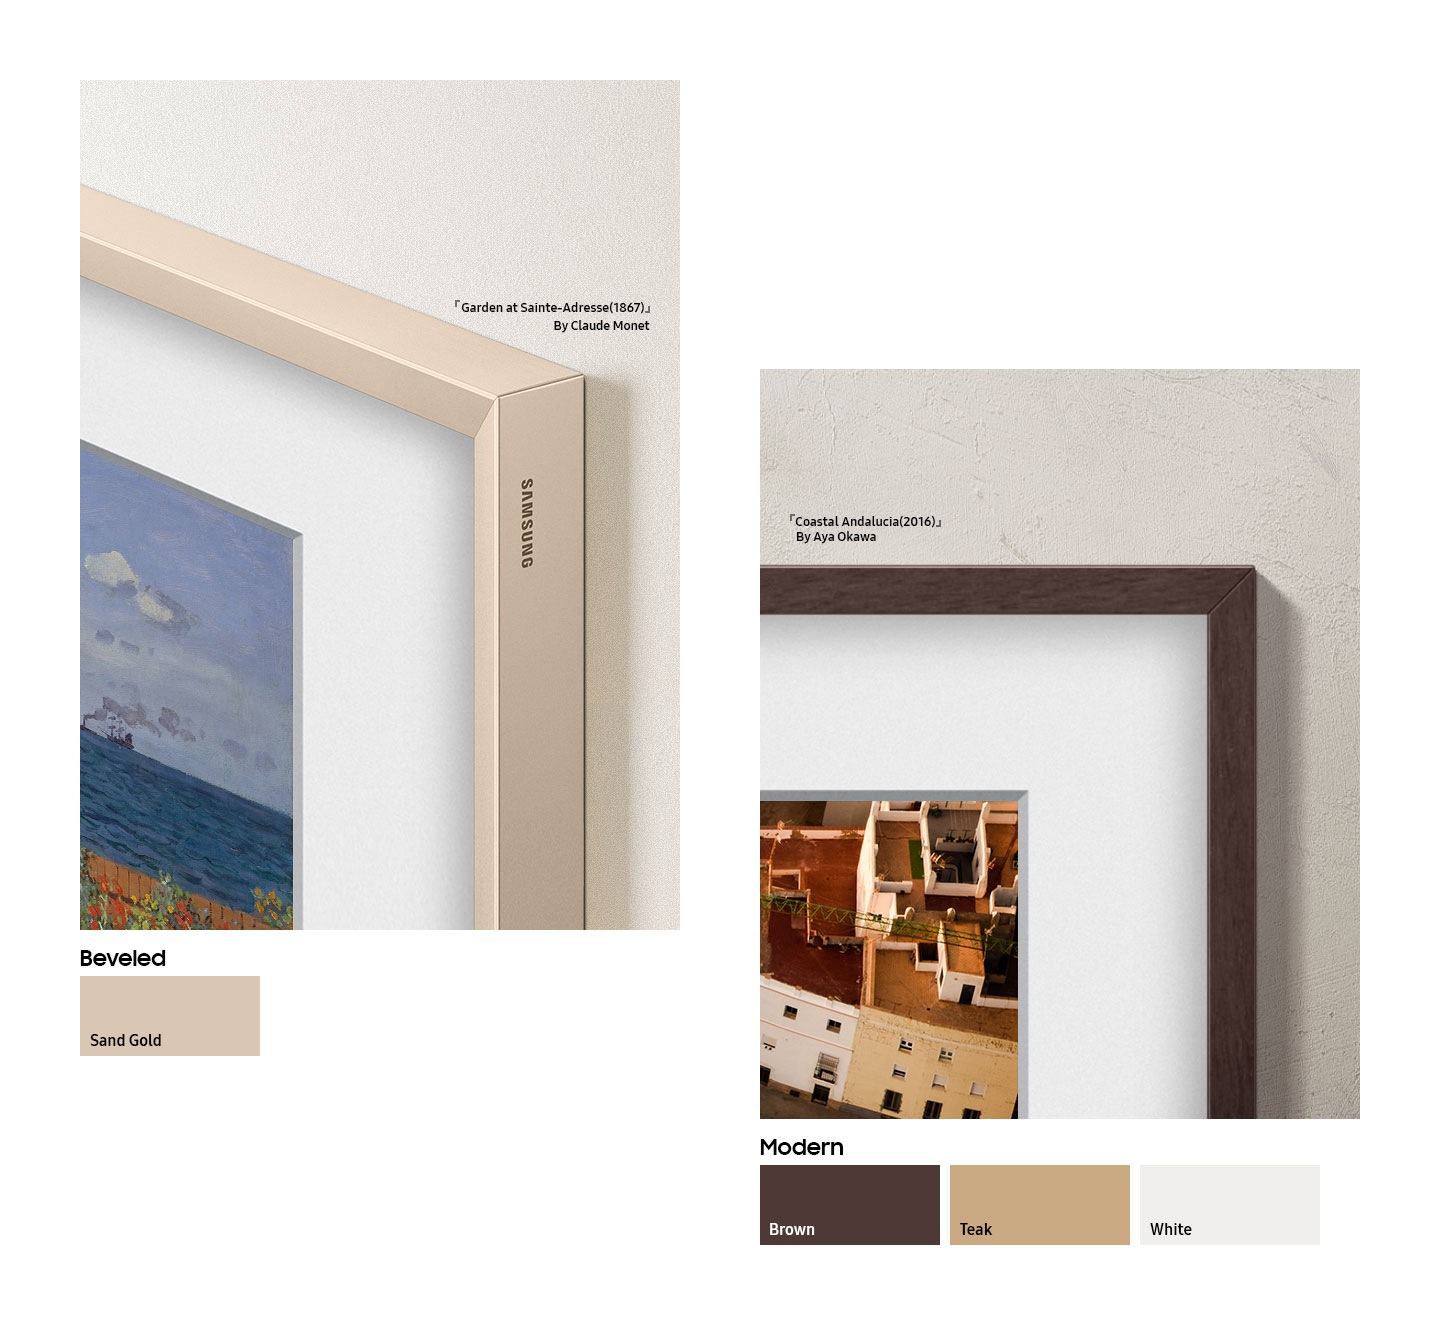 Modern and Beveled bezels show the contemporary and authentic picture frame styles. Sand Gold color chip under Beveled. 'Garden at Sainte-Adresse(1867)' By Claude Monet. Brown, Teak and White color chips under Modern. 'Coastal Andalucia(2016)' By Aya Okawa.